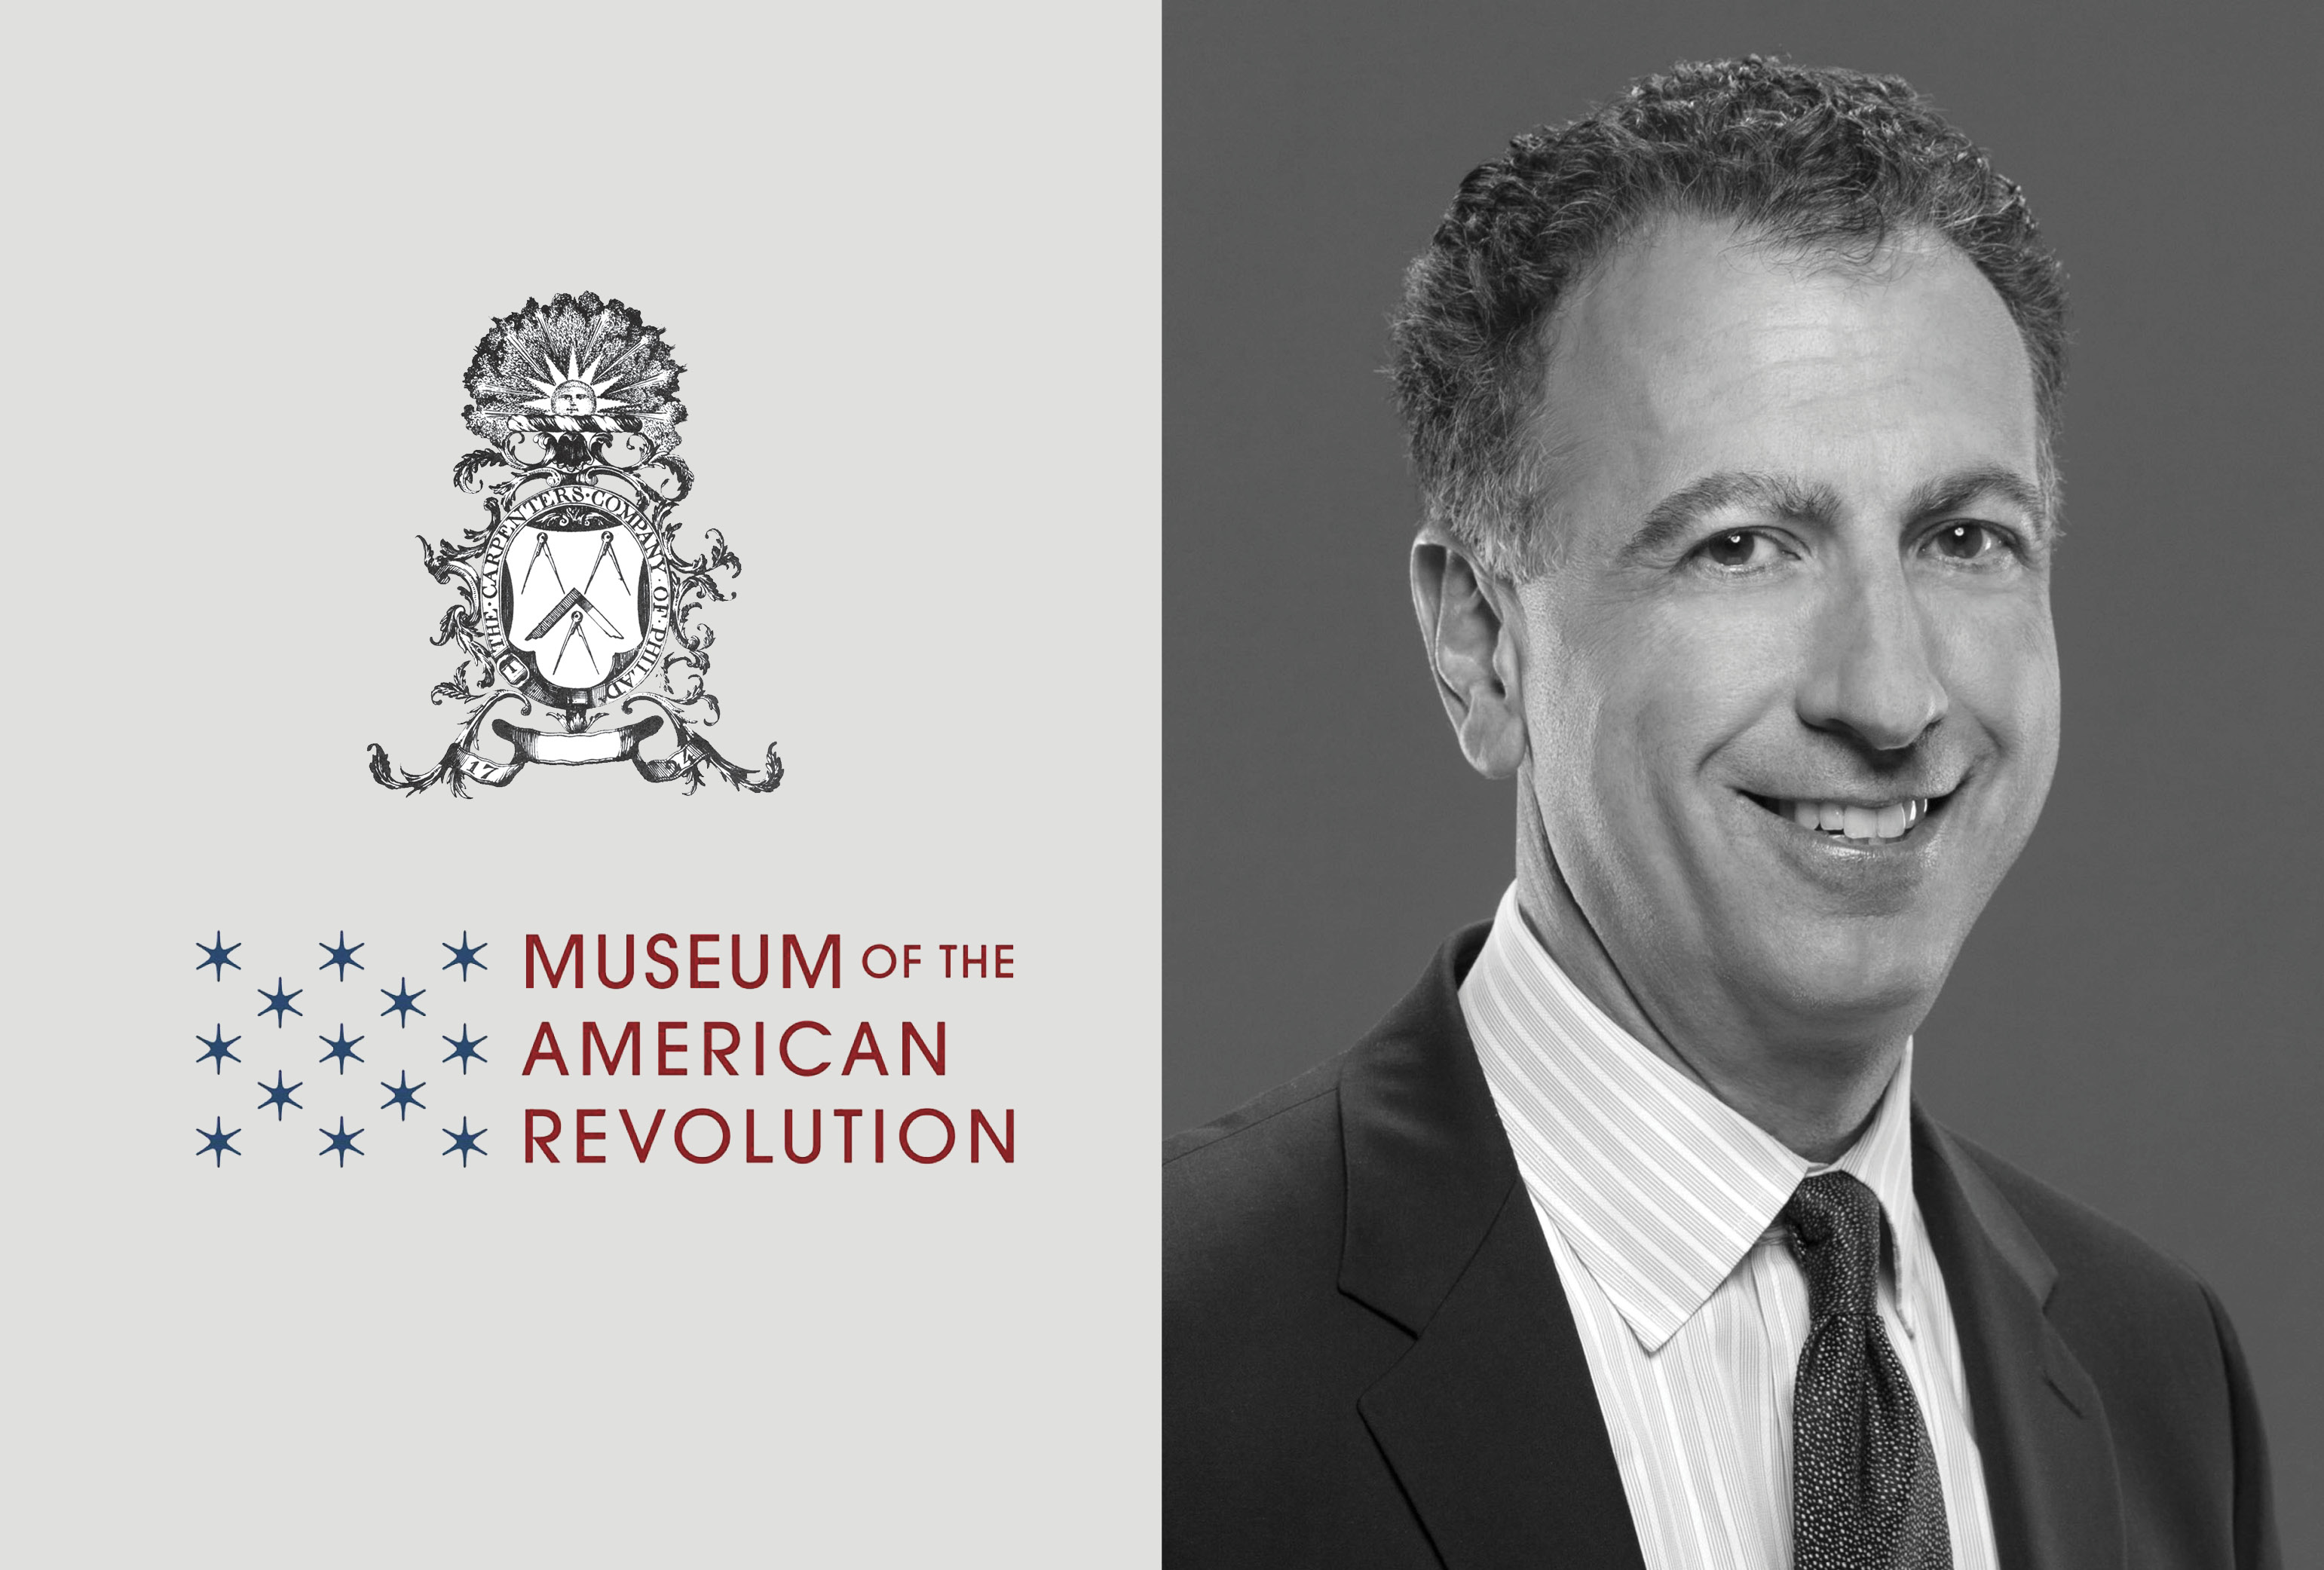 RAMSA Partner Kevin M. Smith to Present the Museum of the American Revolution at the Carpenters' Company Master Builder Dialogues